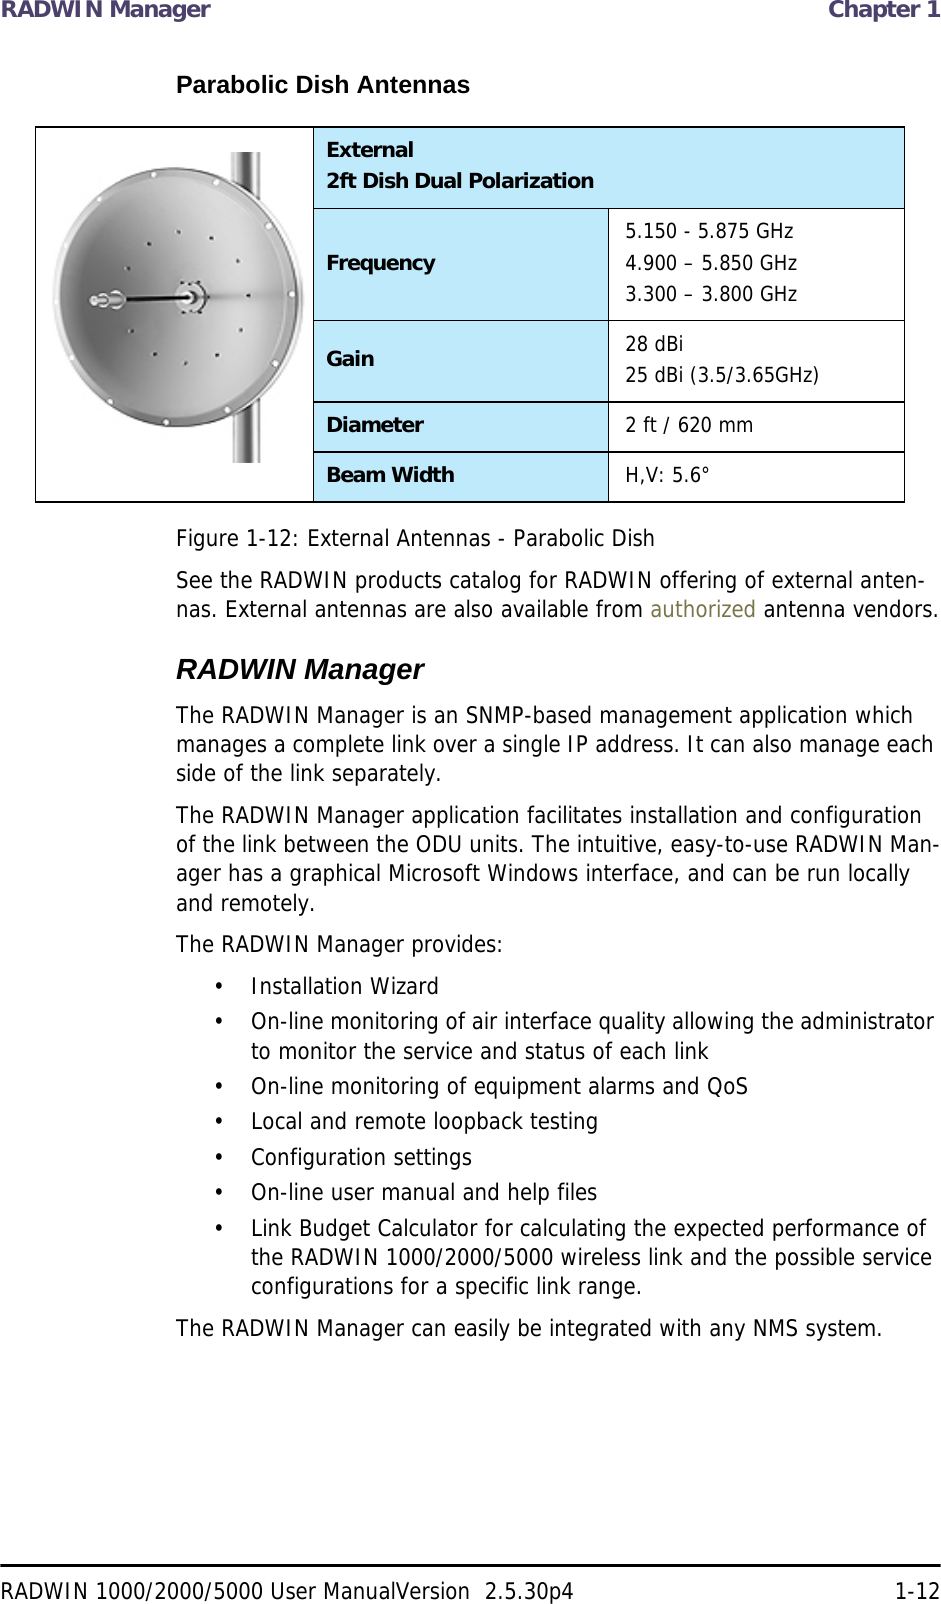 RADWIN Manager  Chapter 1RADWIN 1000/2000/5000 User ManualVersion  2.5.30p4 1-12Parabolic Dish AntennasFigure 1-12: External Antennas - Parabolic DishSee the RADWIN products catalog for RADWIN offering of external anten-nas. External antennas are also available from authorized antenna vendors.RADWIN ManagerThe RADWIN Manager is an SNMP-based management application which manages a complete link over a single IP address. It can also manage each side of the link separately.The RADWIN Manager application facilitates installation and configuration of the link between the ODU units. The intuitive, easy-to-use RADWIN Man-ager has a graphical Microsoft Windows interface, and can be run locally and remotely. The RADWIN Manager provides:• Installation Wizard• On-line monitoring of air interface quality allowing the administrator to monitor the service and status of each link• On-line monitoring of equipment alarms and QoS• Local and remote loopback testing• Configuration settings• On-line user manual and help files• Link Budget Calculator for calculating the expected performance of the RADWIN 1000/2000/5000 wireless link and the possible service configurations for a specific link range.The RADWIN Manager can easily be integrated with any NMS system.External2ft Dish Dual PolarizationFrequency 5.150 - 5.875 GHz4.900 – 5.850 GHz3.300 – 3.800 GHzGain 28 dBi25 dBi (3.5/3.65GHz)Diameter 2 ft / 620 mmBeam Width H,V: 5.6°